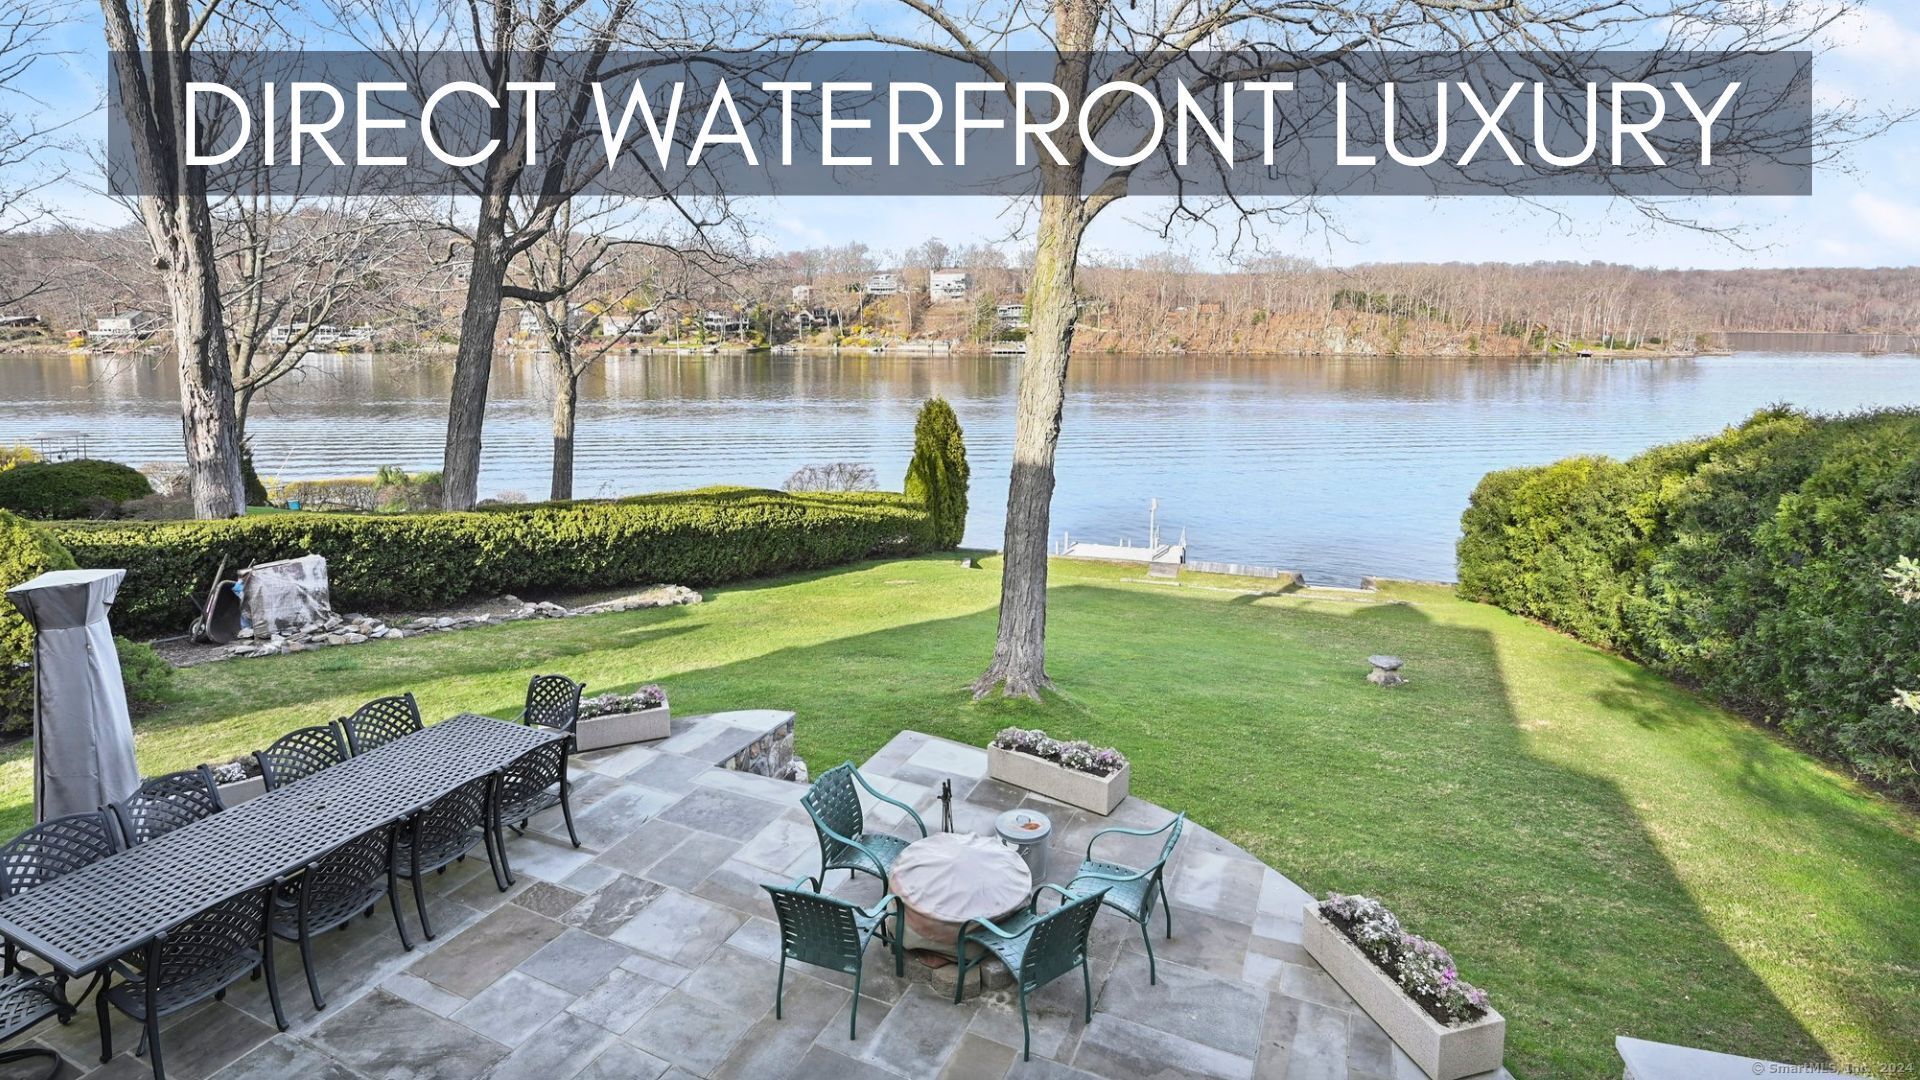 *Lakefront Luxury on Candlewood Lake*. Just beyond a serene cove on Candlewood Lake, this exquisite residence stands as the epitome of lakefront luxury, promising a life of unparalleled ease and serenity. Among the most desired homes on the lake, it offers a slice of paradise with unmatched views. Designed for grand living and familial warmth, its spacious 5-bedroom layout is ideal for hosting and relaxation. The home's outdoor allure is undeniable, with a private yard sloping gently to 125 feet of lakefront, a large deck, an outdoor bar, a hot tub, and a large dock for immersive lakeside experiences. Inside, the main floor boasts a lakefront living room with a gas fireplace and an open-concept chef's kitchen, merging practicality with splendor. Upstairs, a master suite with a fireplace, private balcony, and spa bathroom create sanctuaries of peace. On this level you will also find a guest bedroom with a lakefront balcony. The lower level features two more bedrooms and all the entertainment essentials you need such as commercial refrigerators, a wet bar, and a steam shower. The separate garage with a game and billiard room adds fun to this luxurious setting. Sold fully furnished, this home is a ready-made haven for a turnkey lake lifestyle, meticulously crafted for comfort, luxury, and unforgettable memories. Embrace your dream life on Candlewood Lake, where every detail is refined for the ultimate lakeside living experience. Click the Camera icon for a video tour.